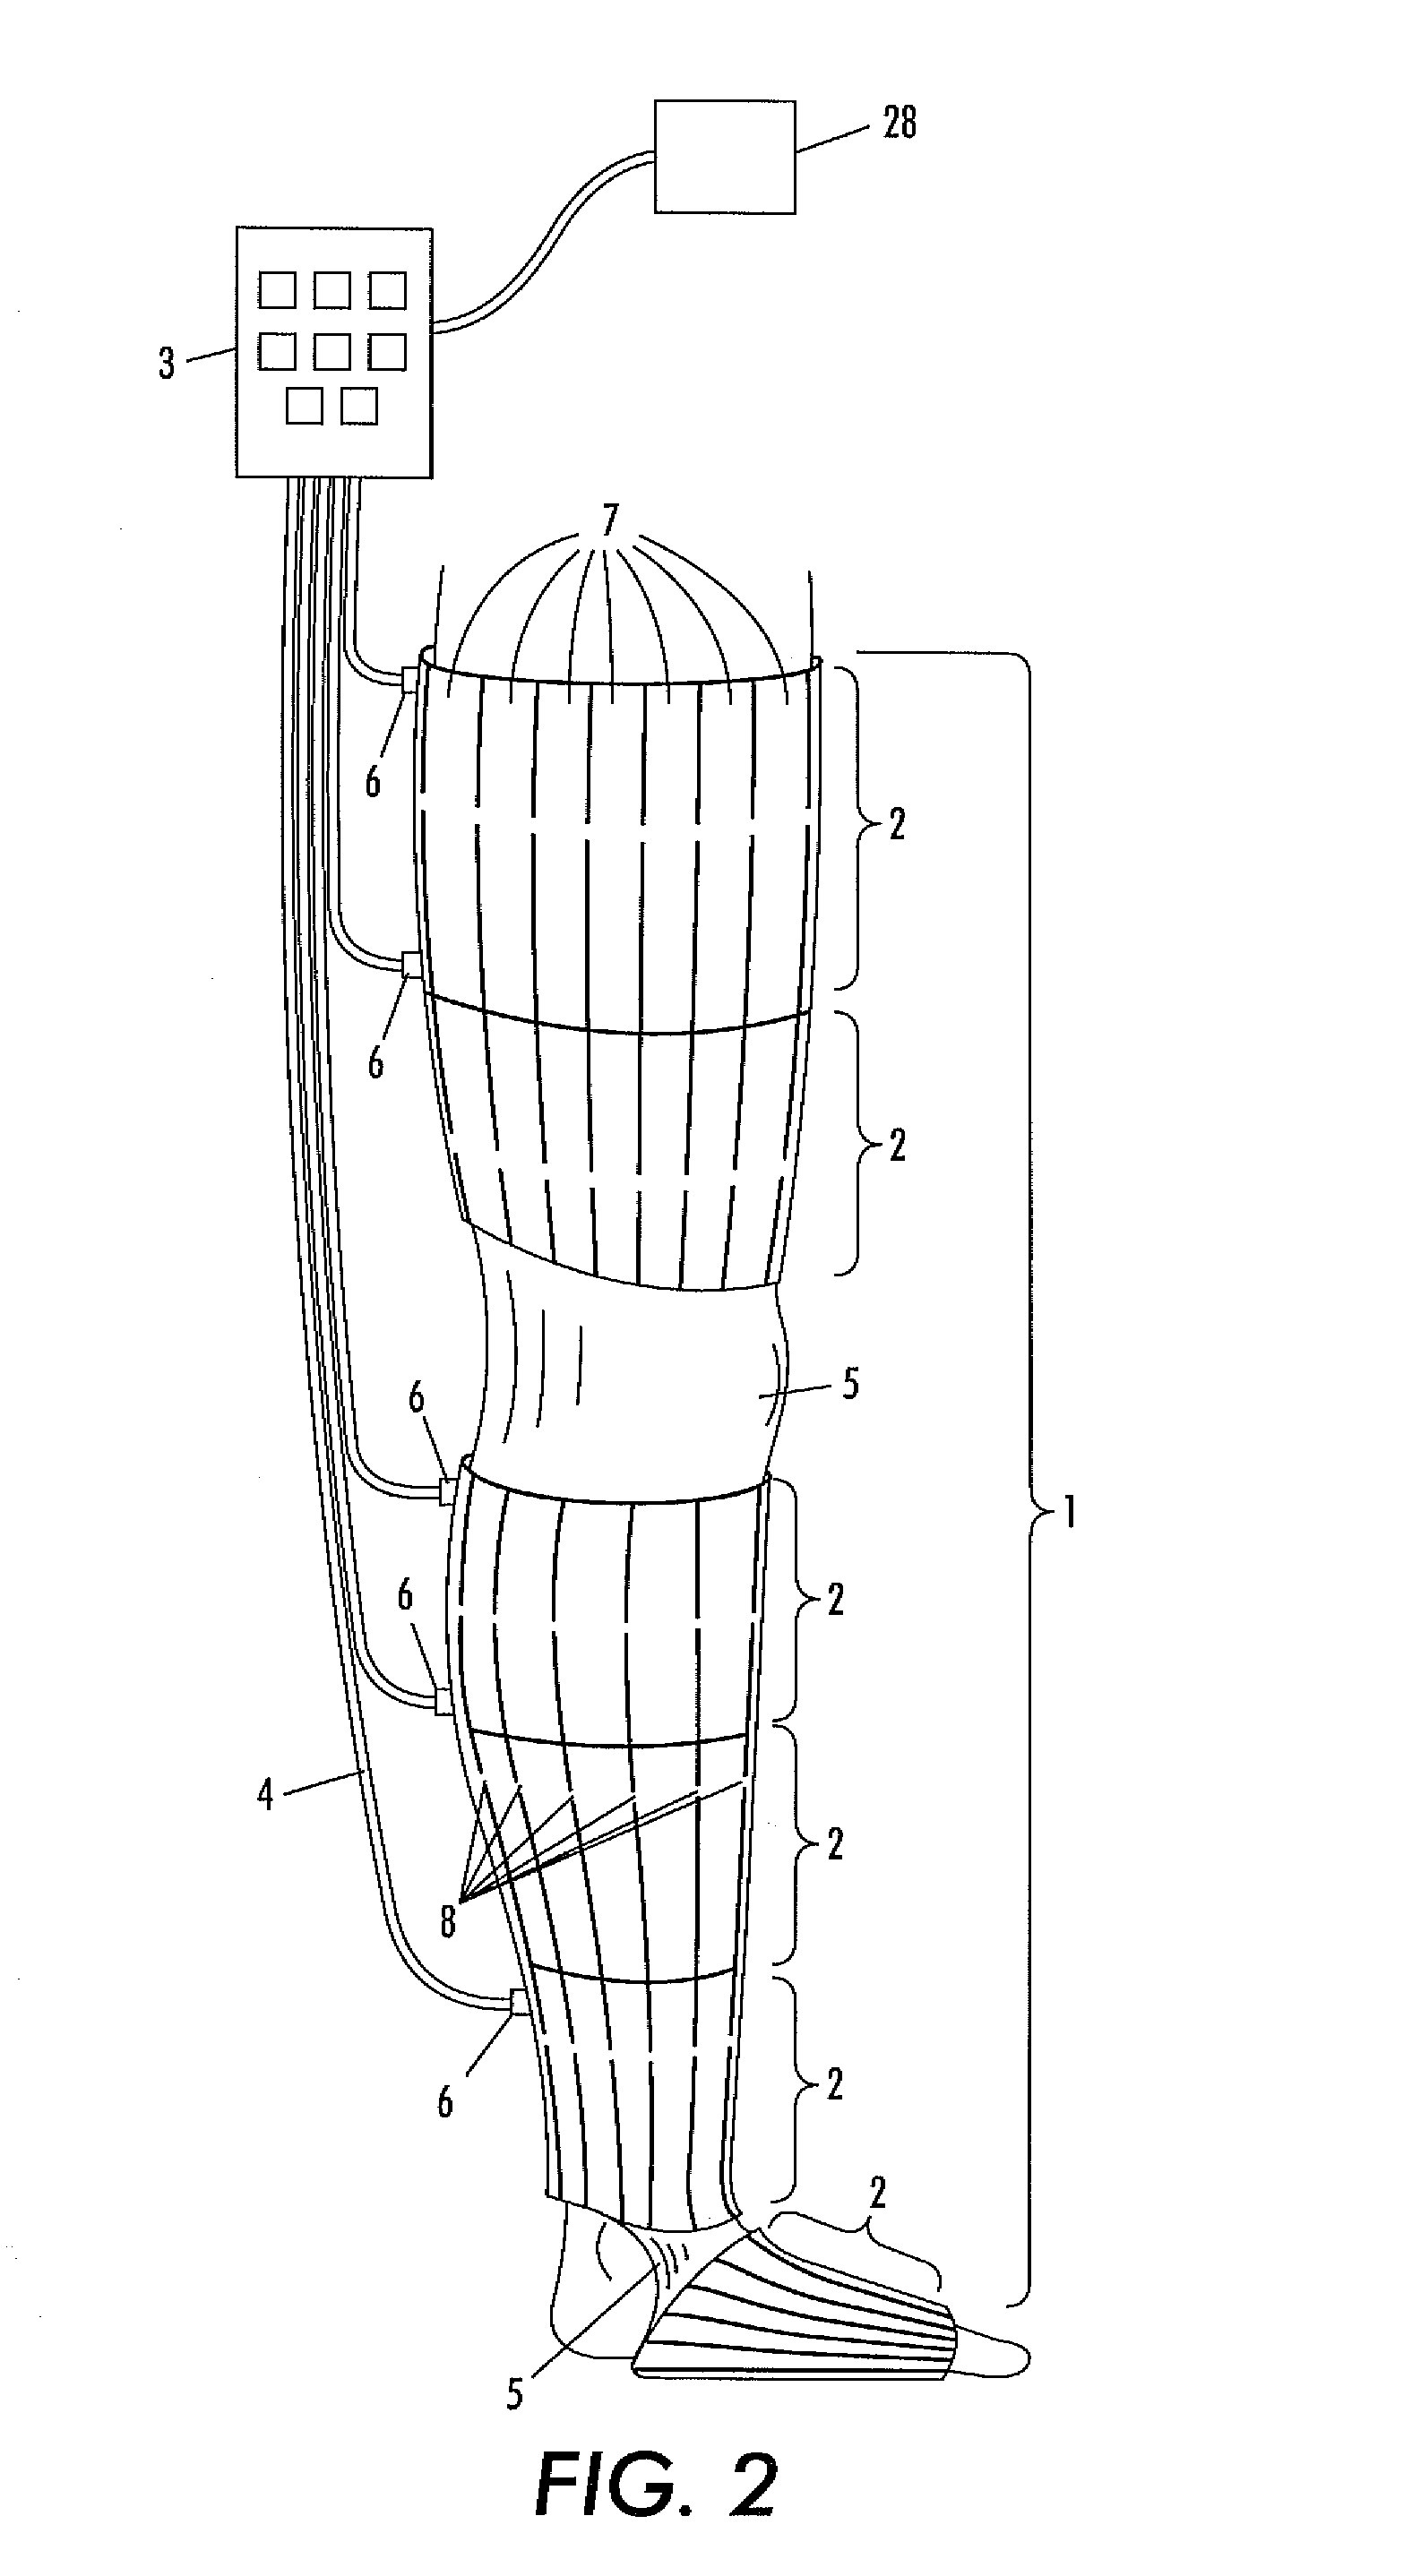 Method and apparatus for assisting vascular flow through external compression synchronized with venous phasic flow